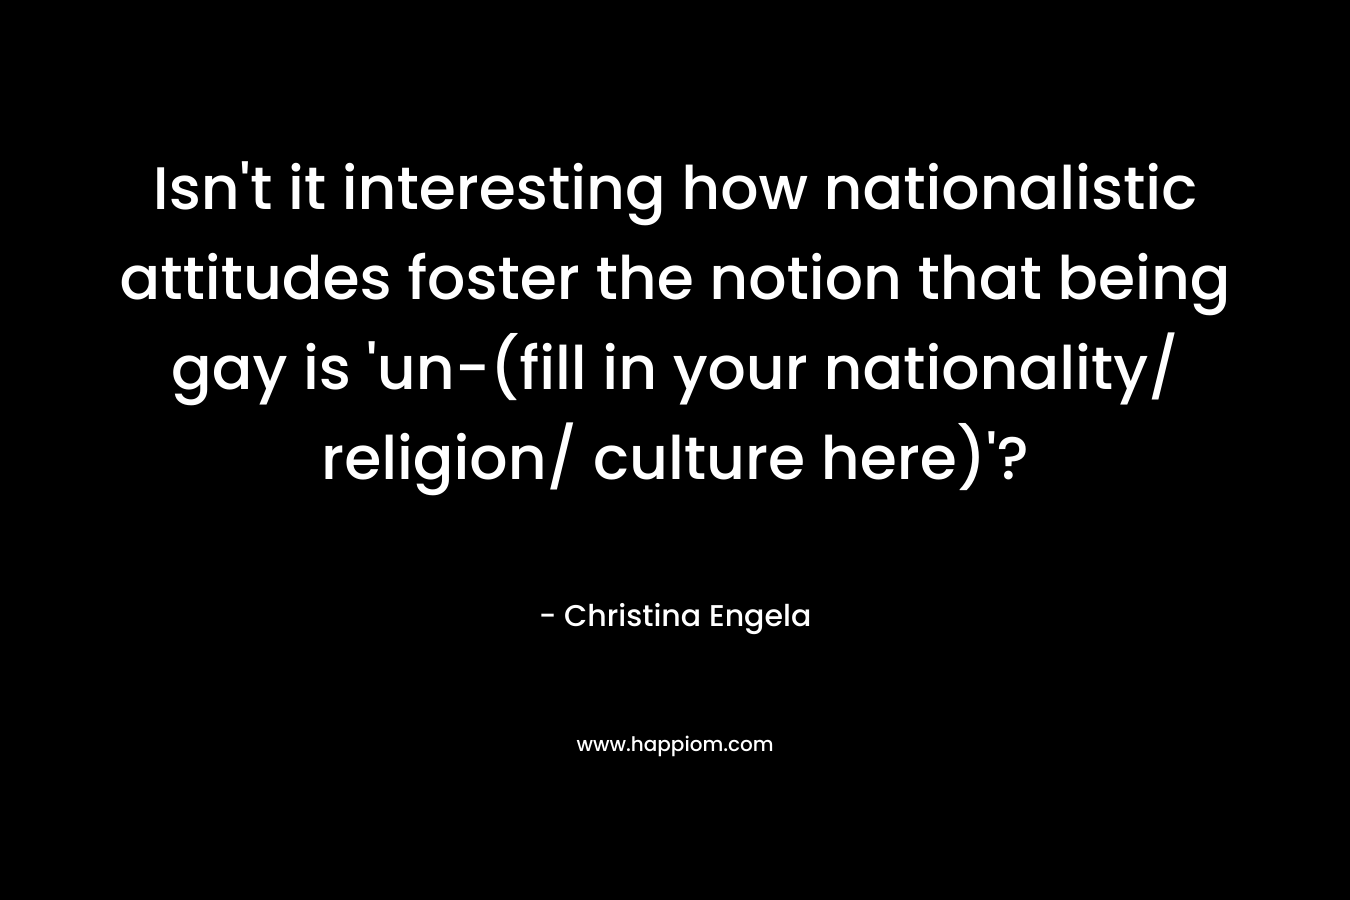 Isn’t it interesting how nationalistic attitudes foster the notion that being gay is ‘un-(fill in your nationality/ religion/ culture here)’? – Christina Engela